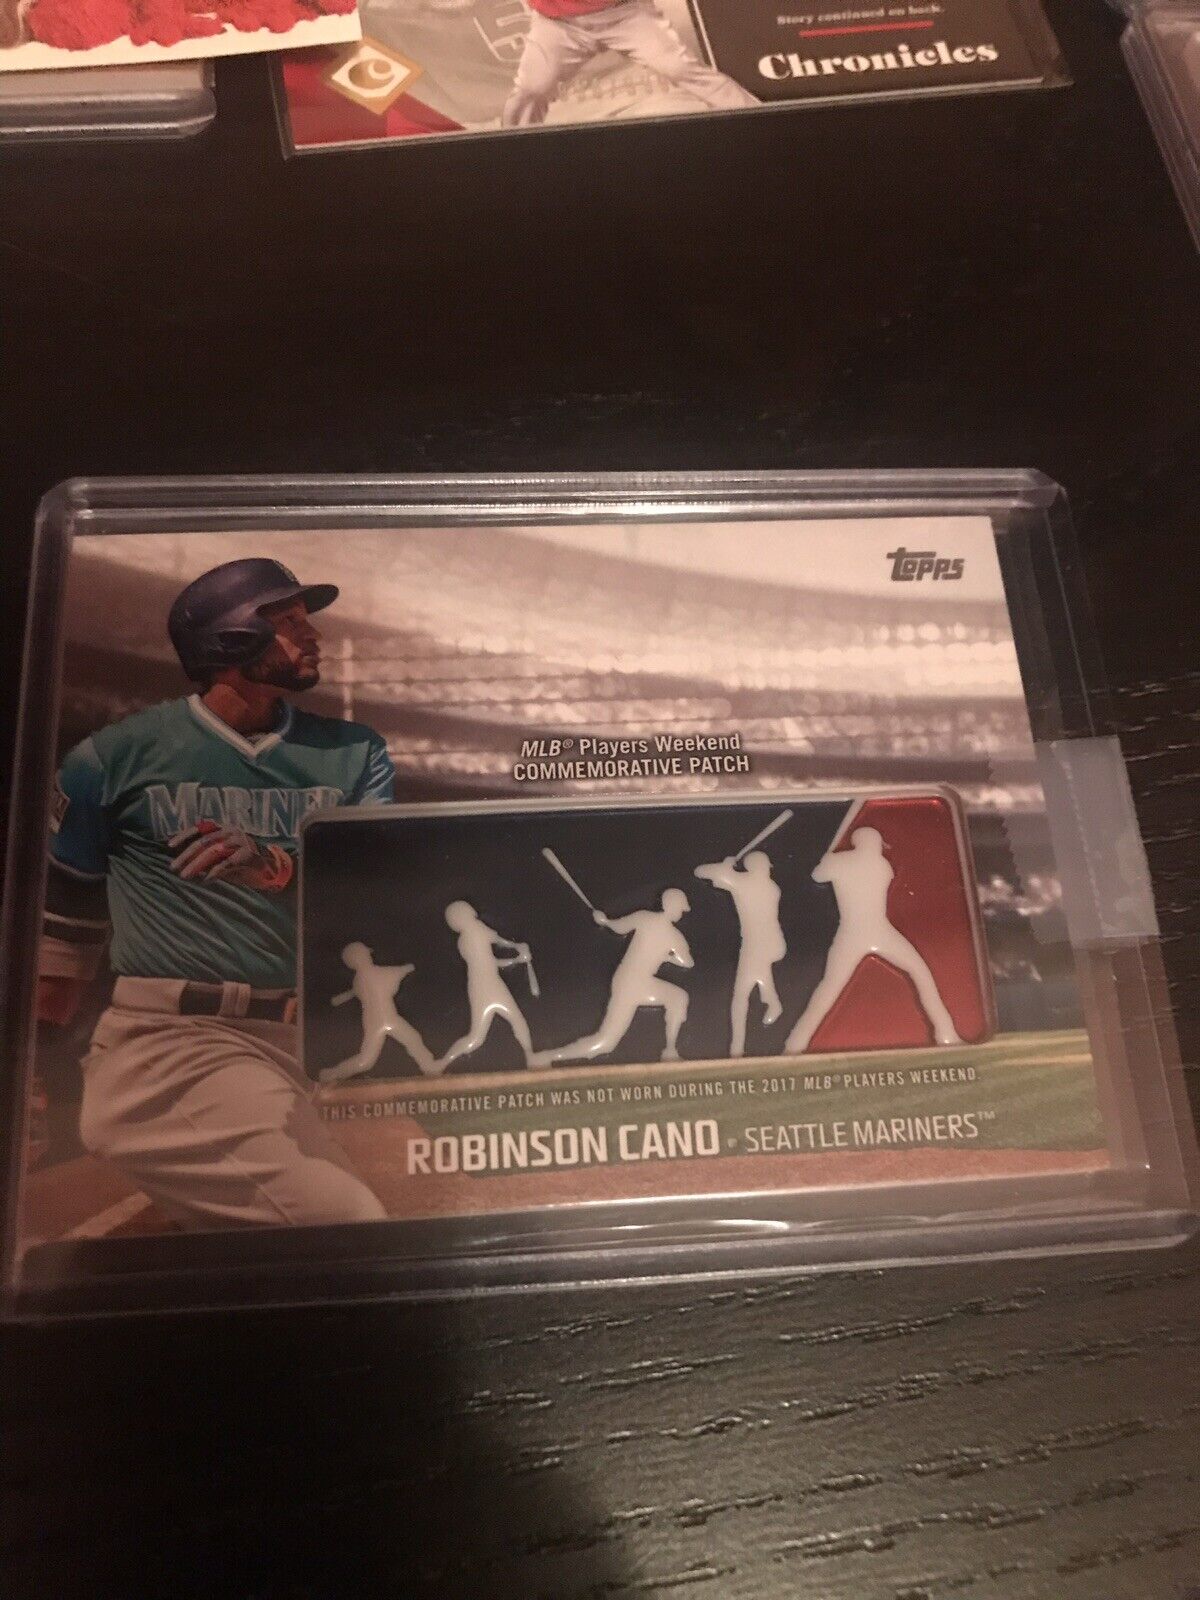 2018 Robinson Cano Seattle Mariners/ Mets Topps Player Weekend Logo Patch Card